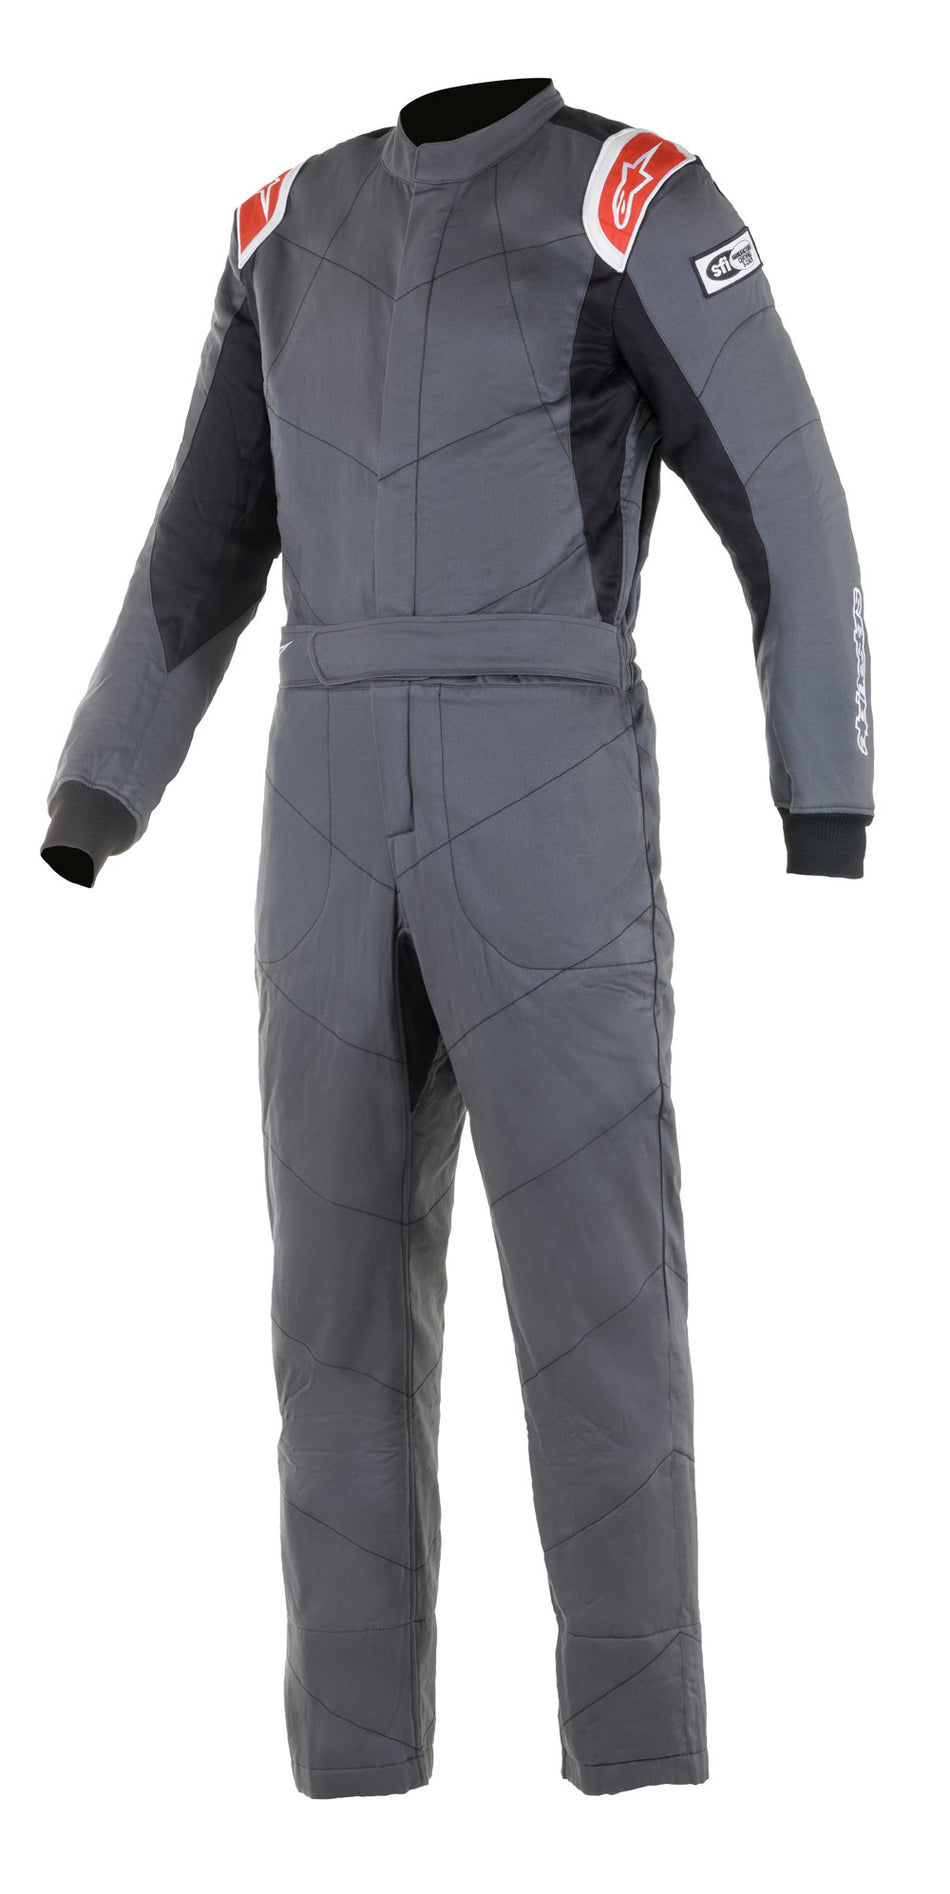 Driving Suit - Knoxville V2 - 1-Piece - SFI 3.2A/5 - Boot-Cut - Triple Layer - Fire Retardant Fabric - Gray / Red - Size 54 - Medium / Large - Each